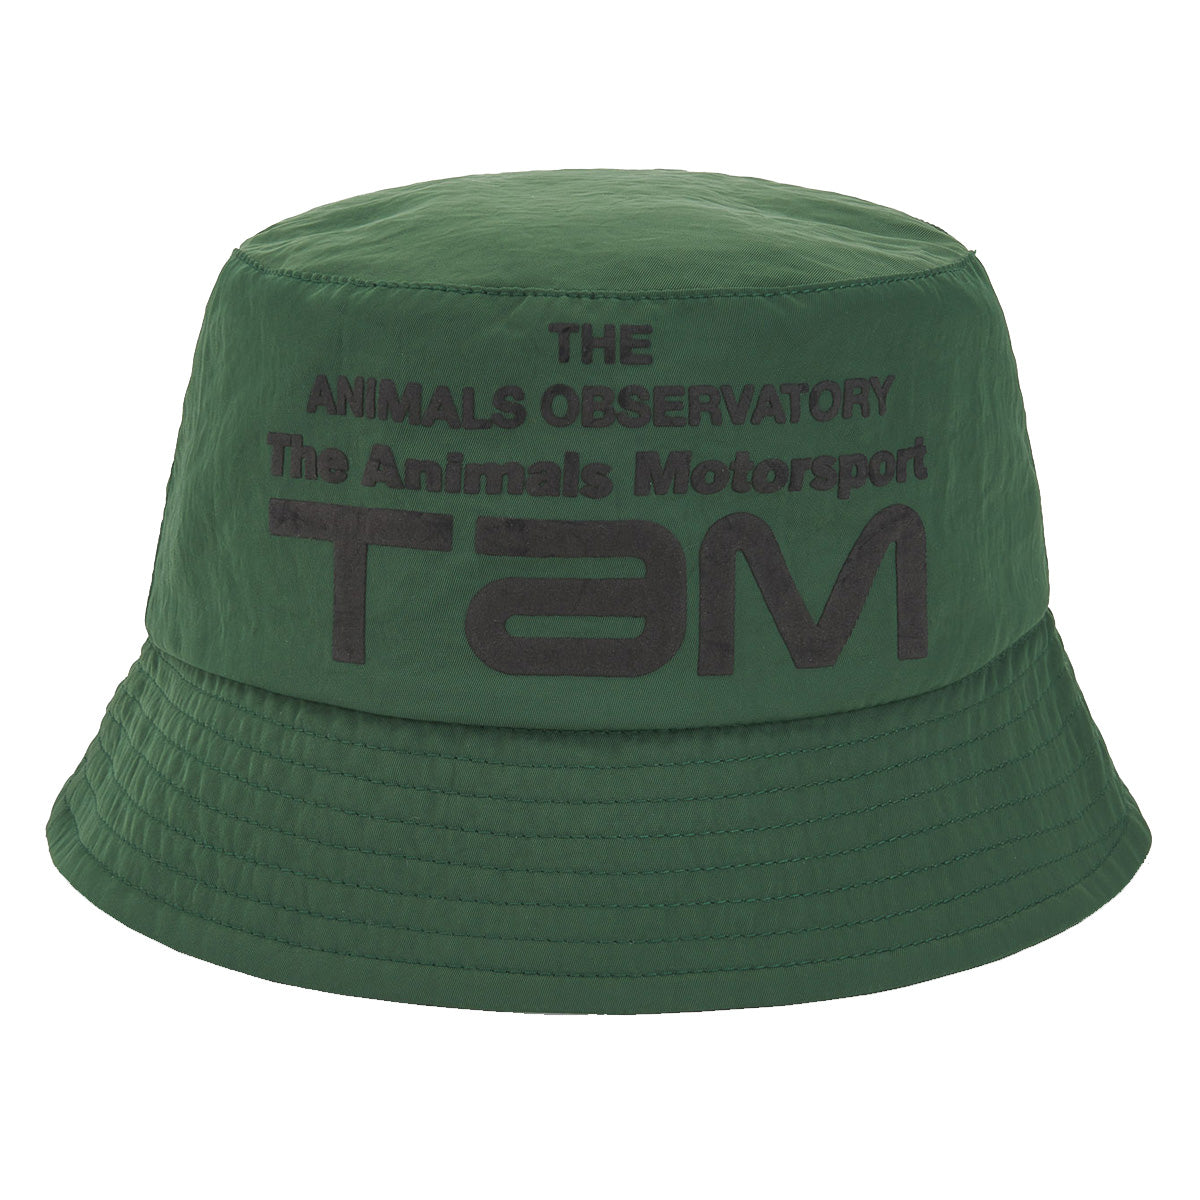 The Starfish Bucket Hat from The Animals Observatory features a vintage-inspired motorsport 